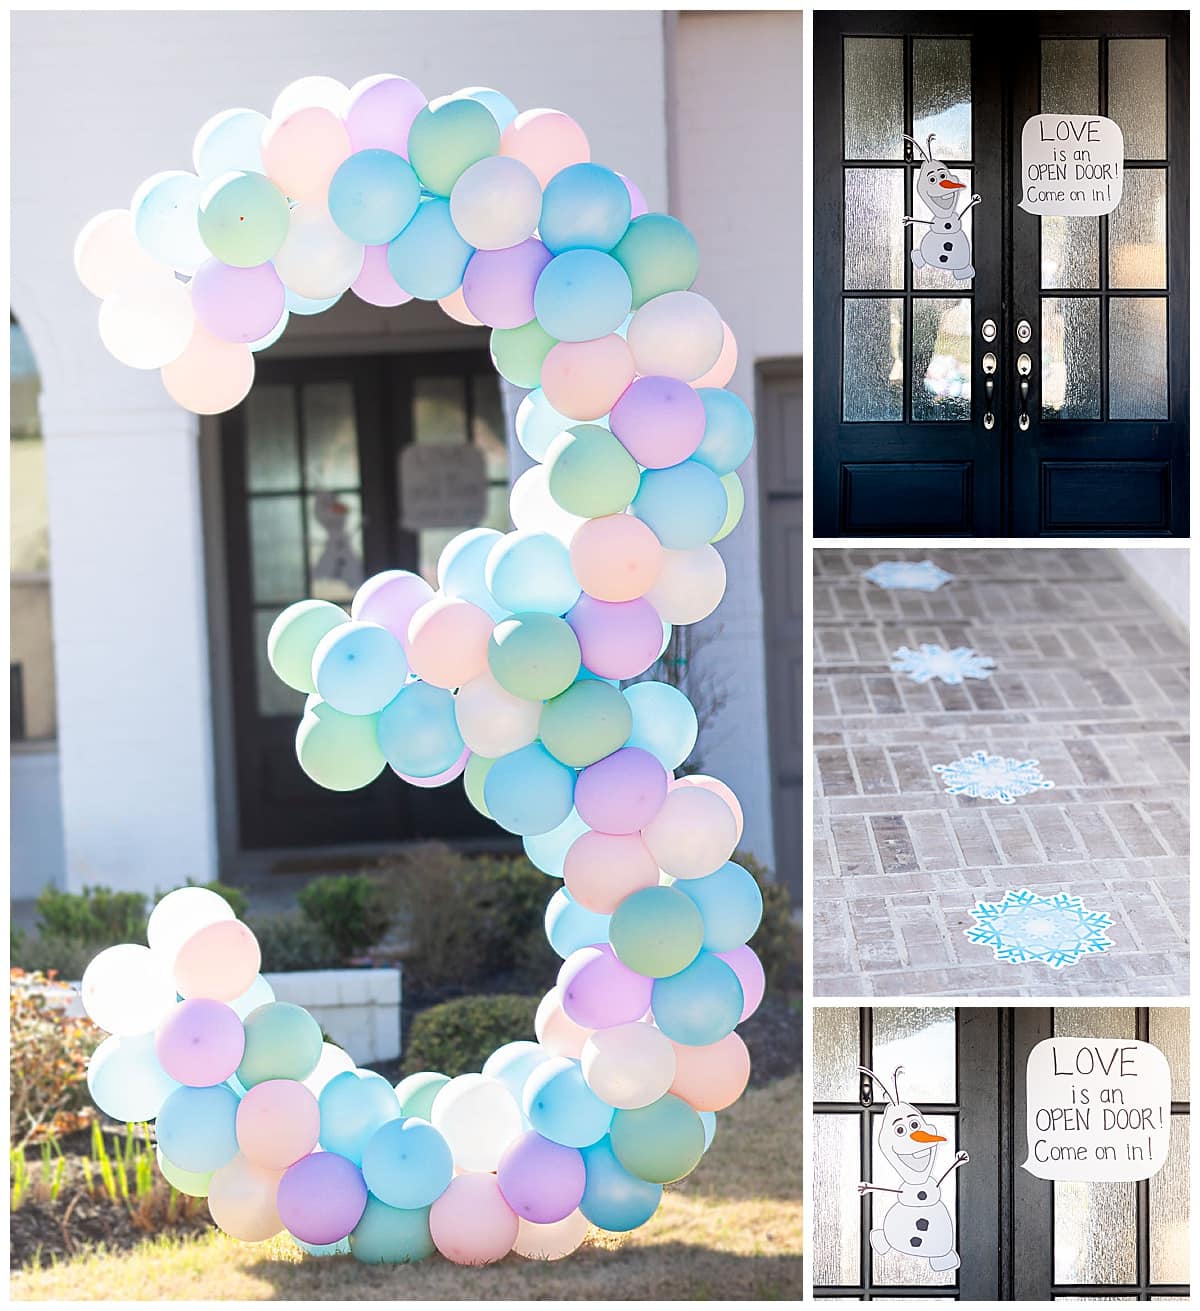 Collage of outdoor decor for a Frozen birthday party